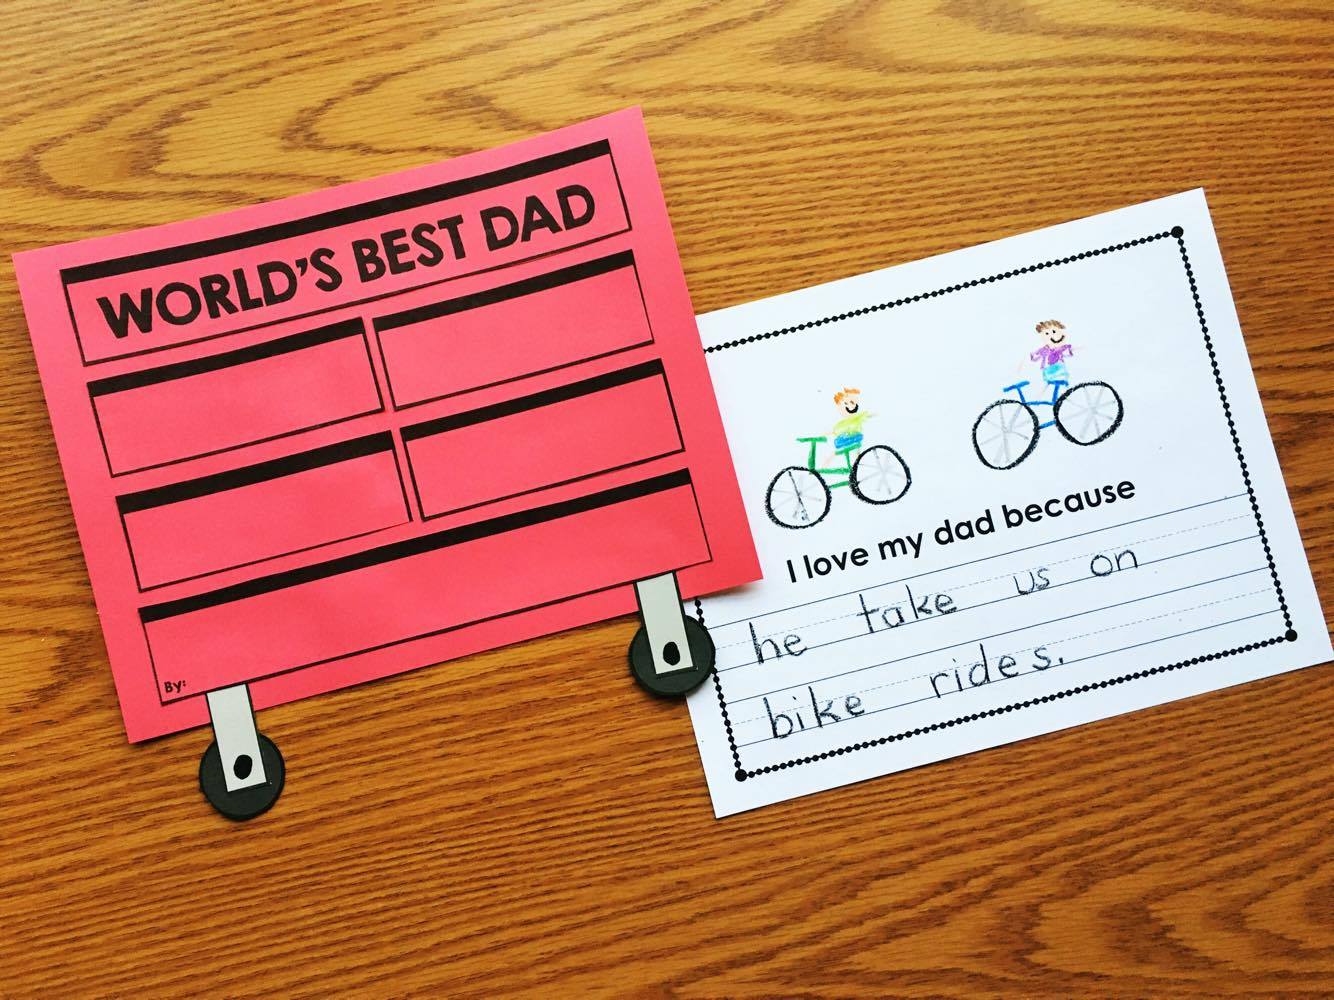 A fun toolbox book for Father's Day.